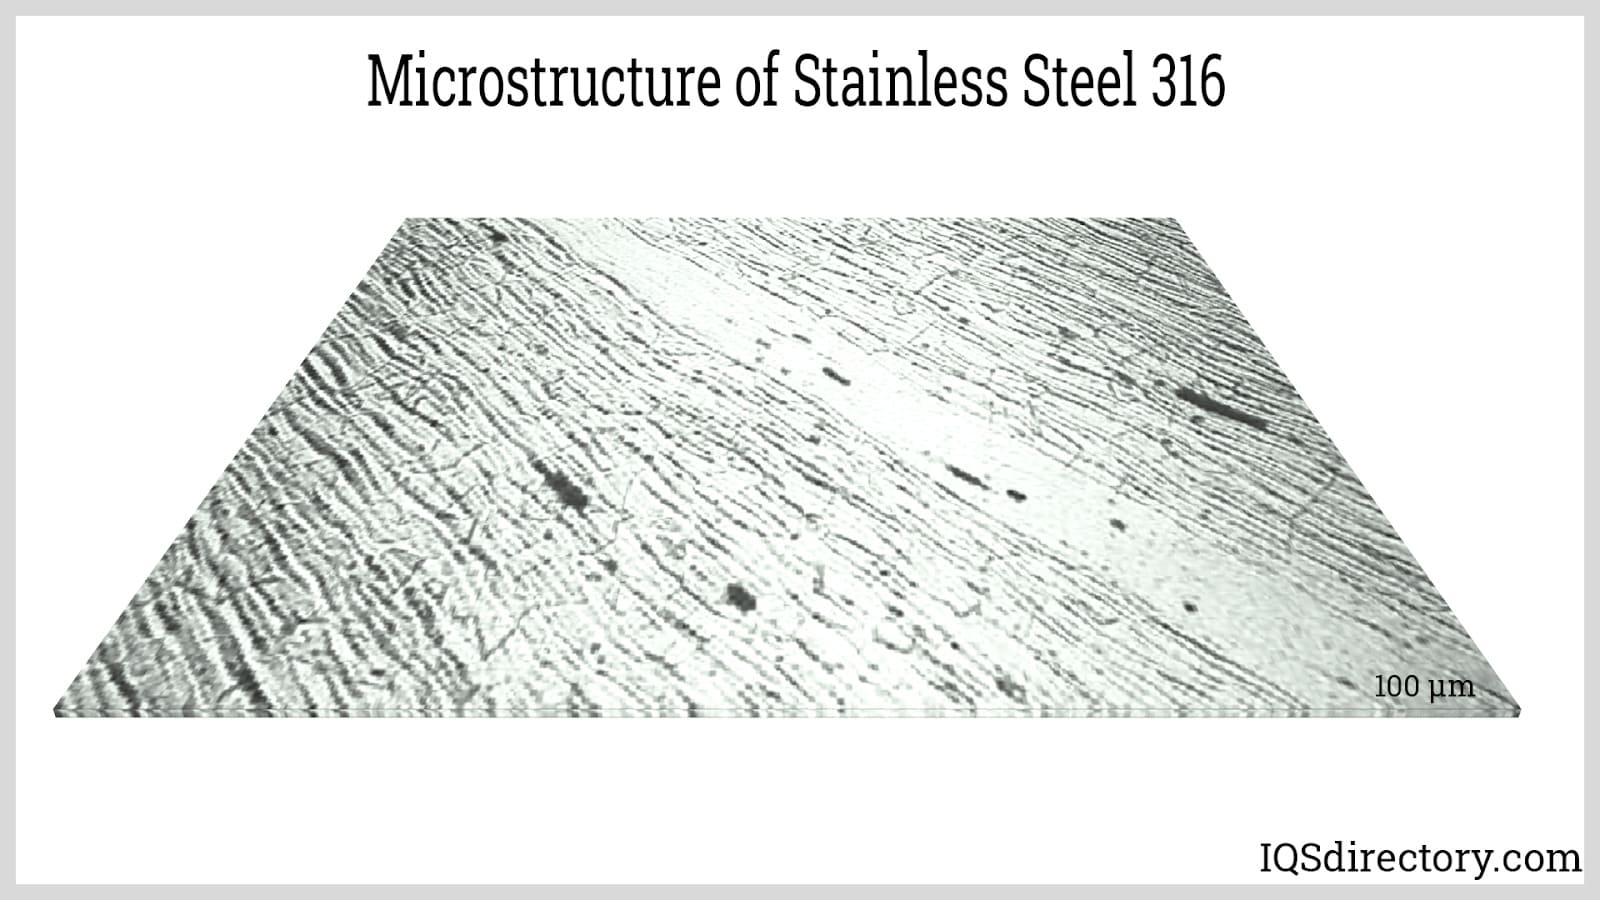 Microstructure of Stainless Steel 316